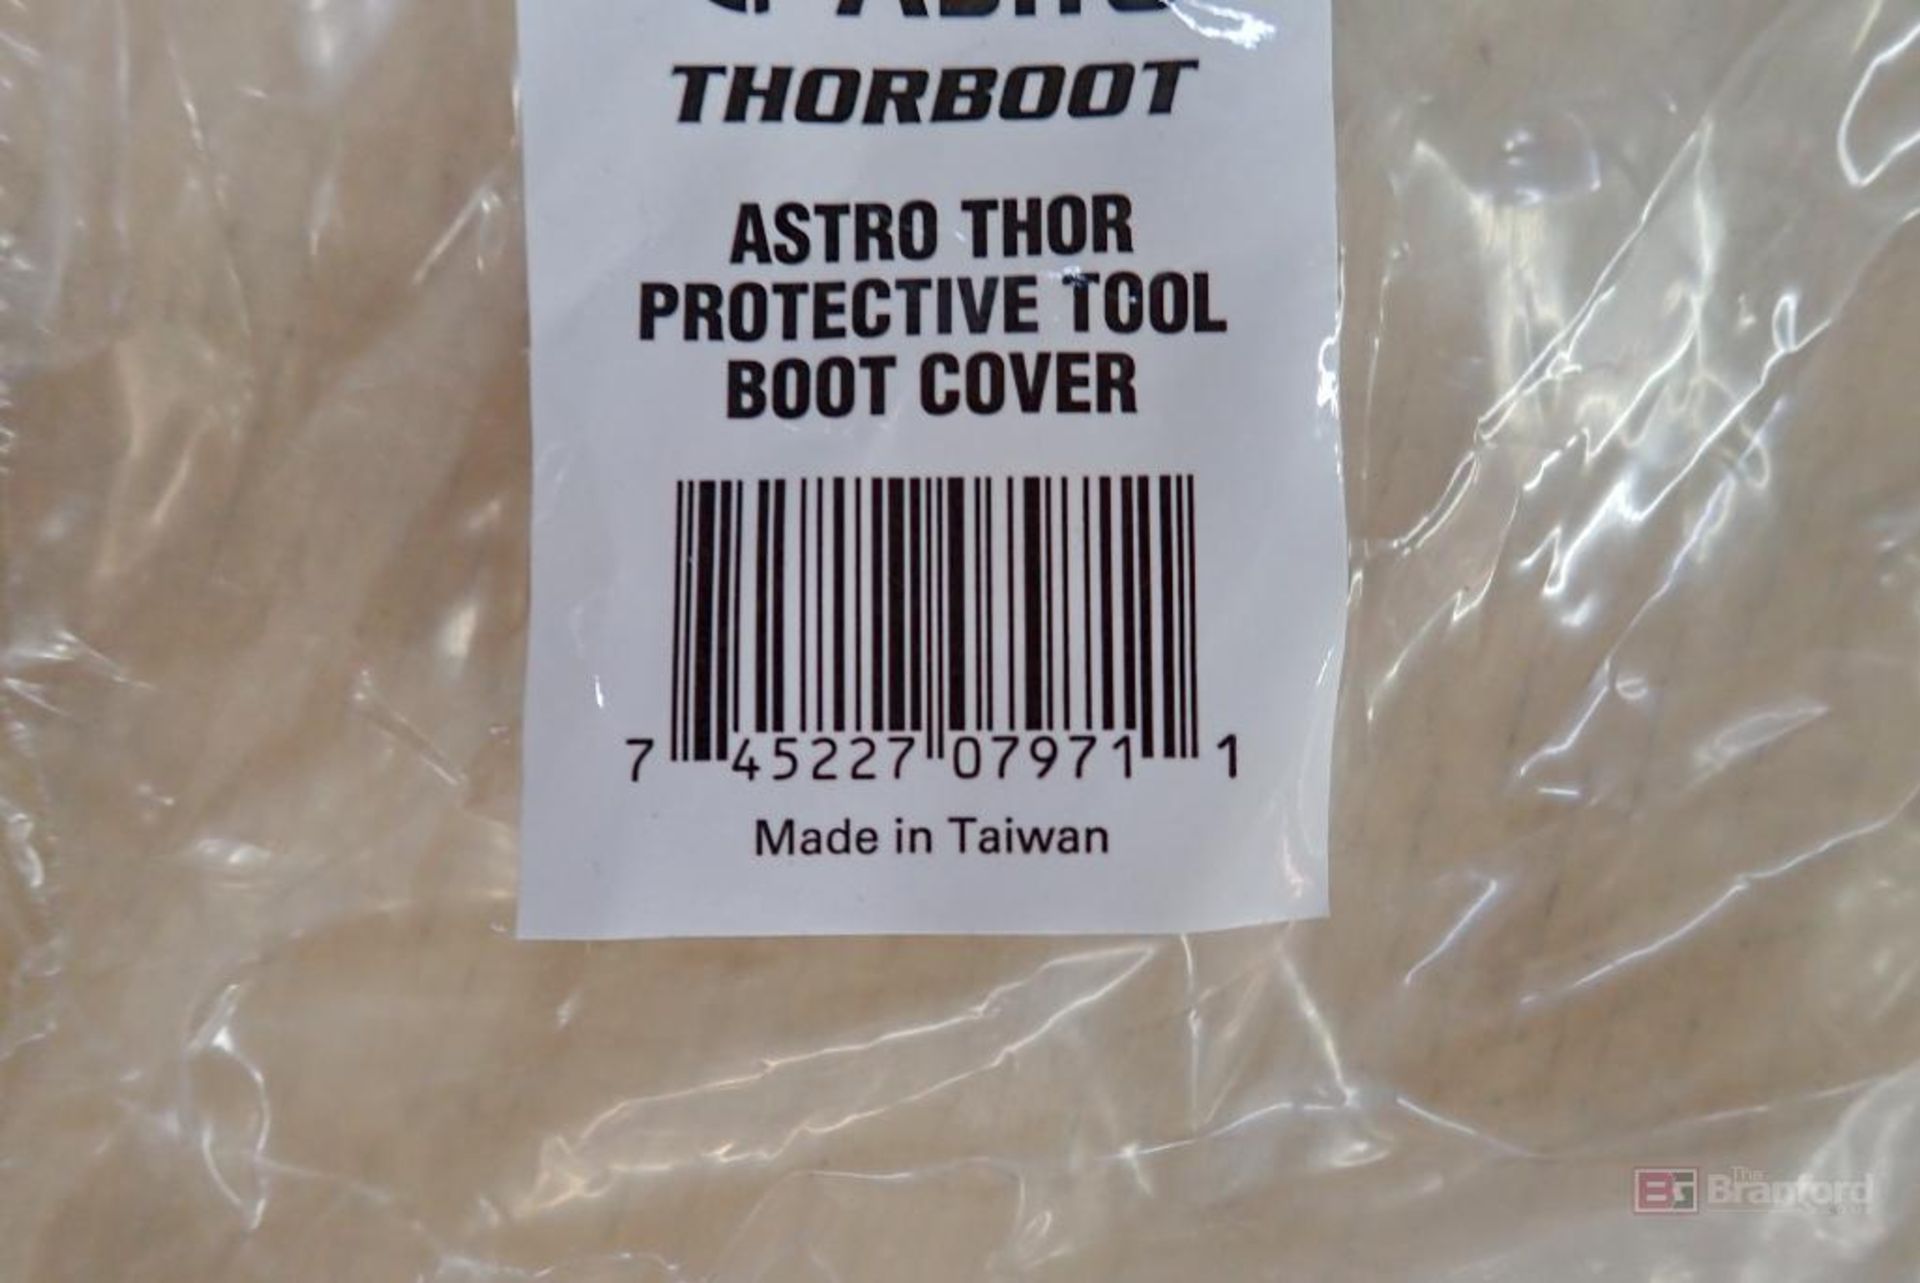 Box Lot of Astro Thorboot Protective Tool Boot Covers - Image 3 of 3